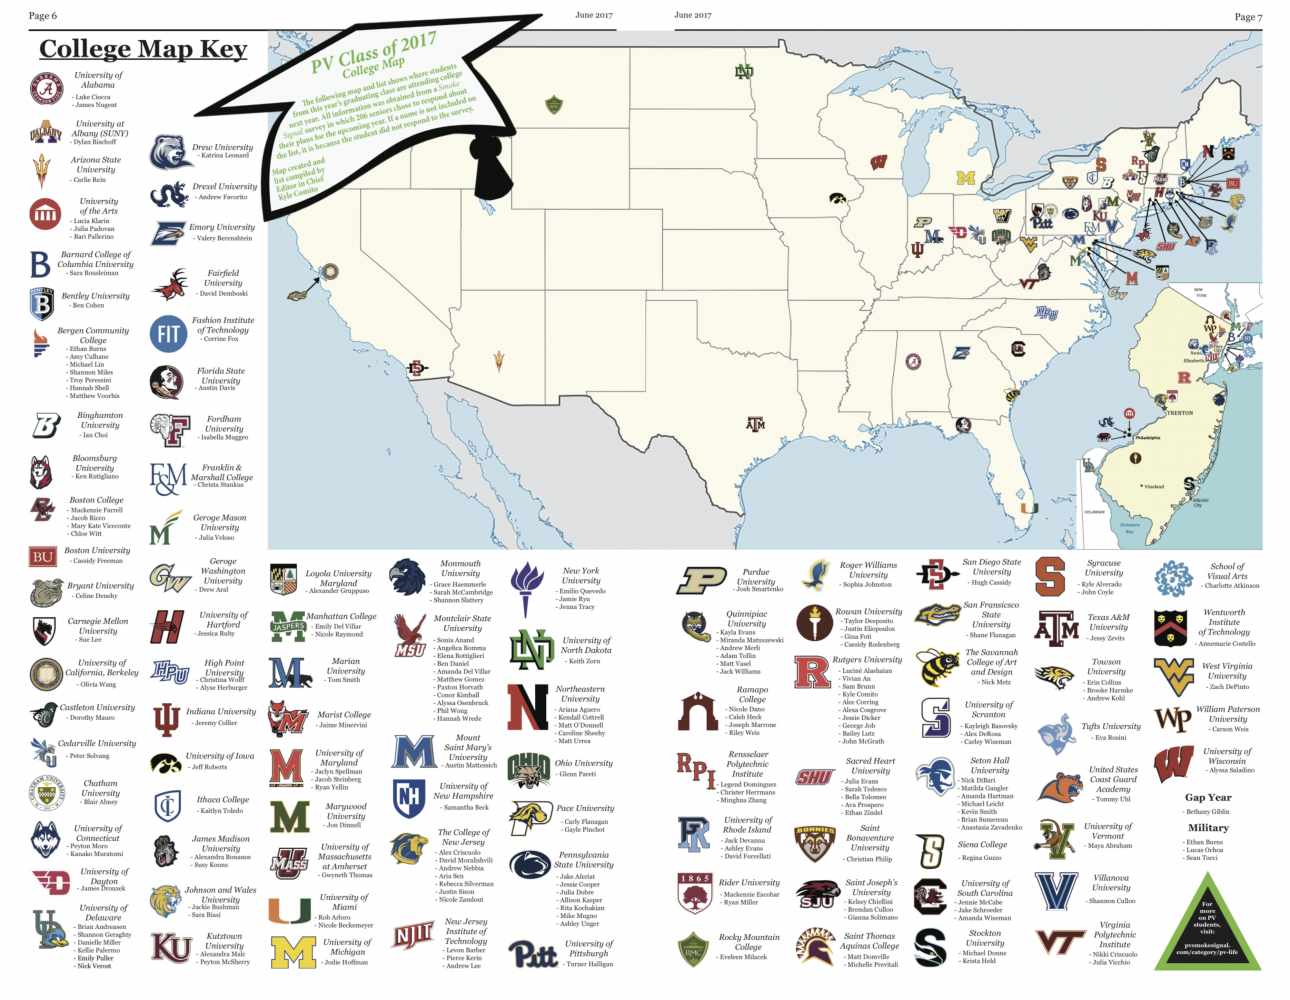 The map and list show where students from this years graduating class are attending college next year. All information was obtained from a Smoke Signal Survey in which 206 seniors chose to respond about their plans for the upcoming year. If a name is not included on the list, it is because the student did not respond to the survey. 